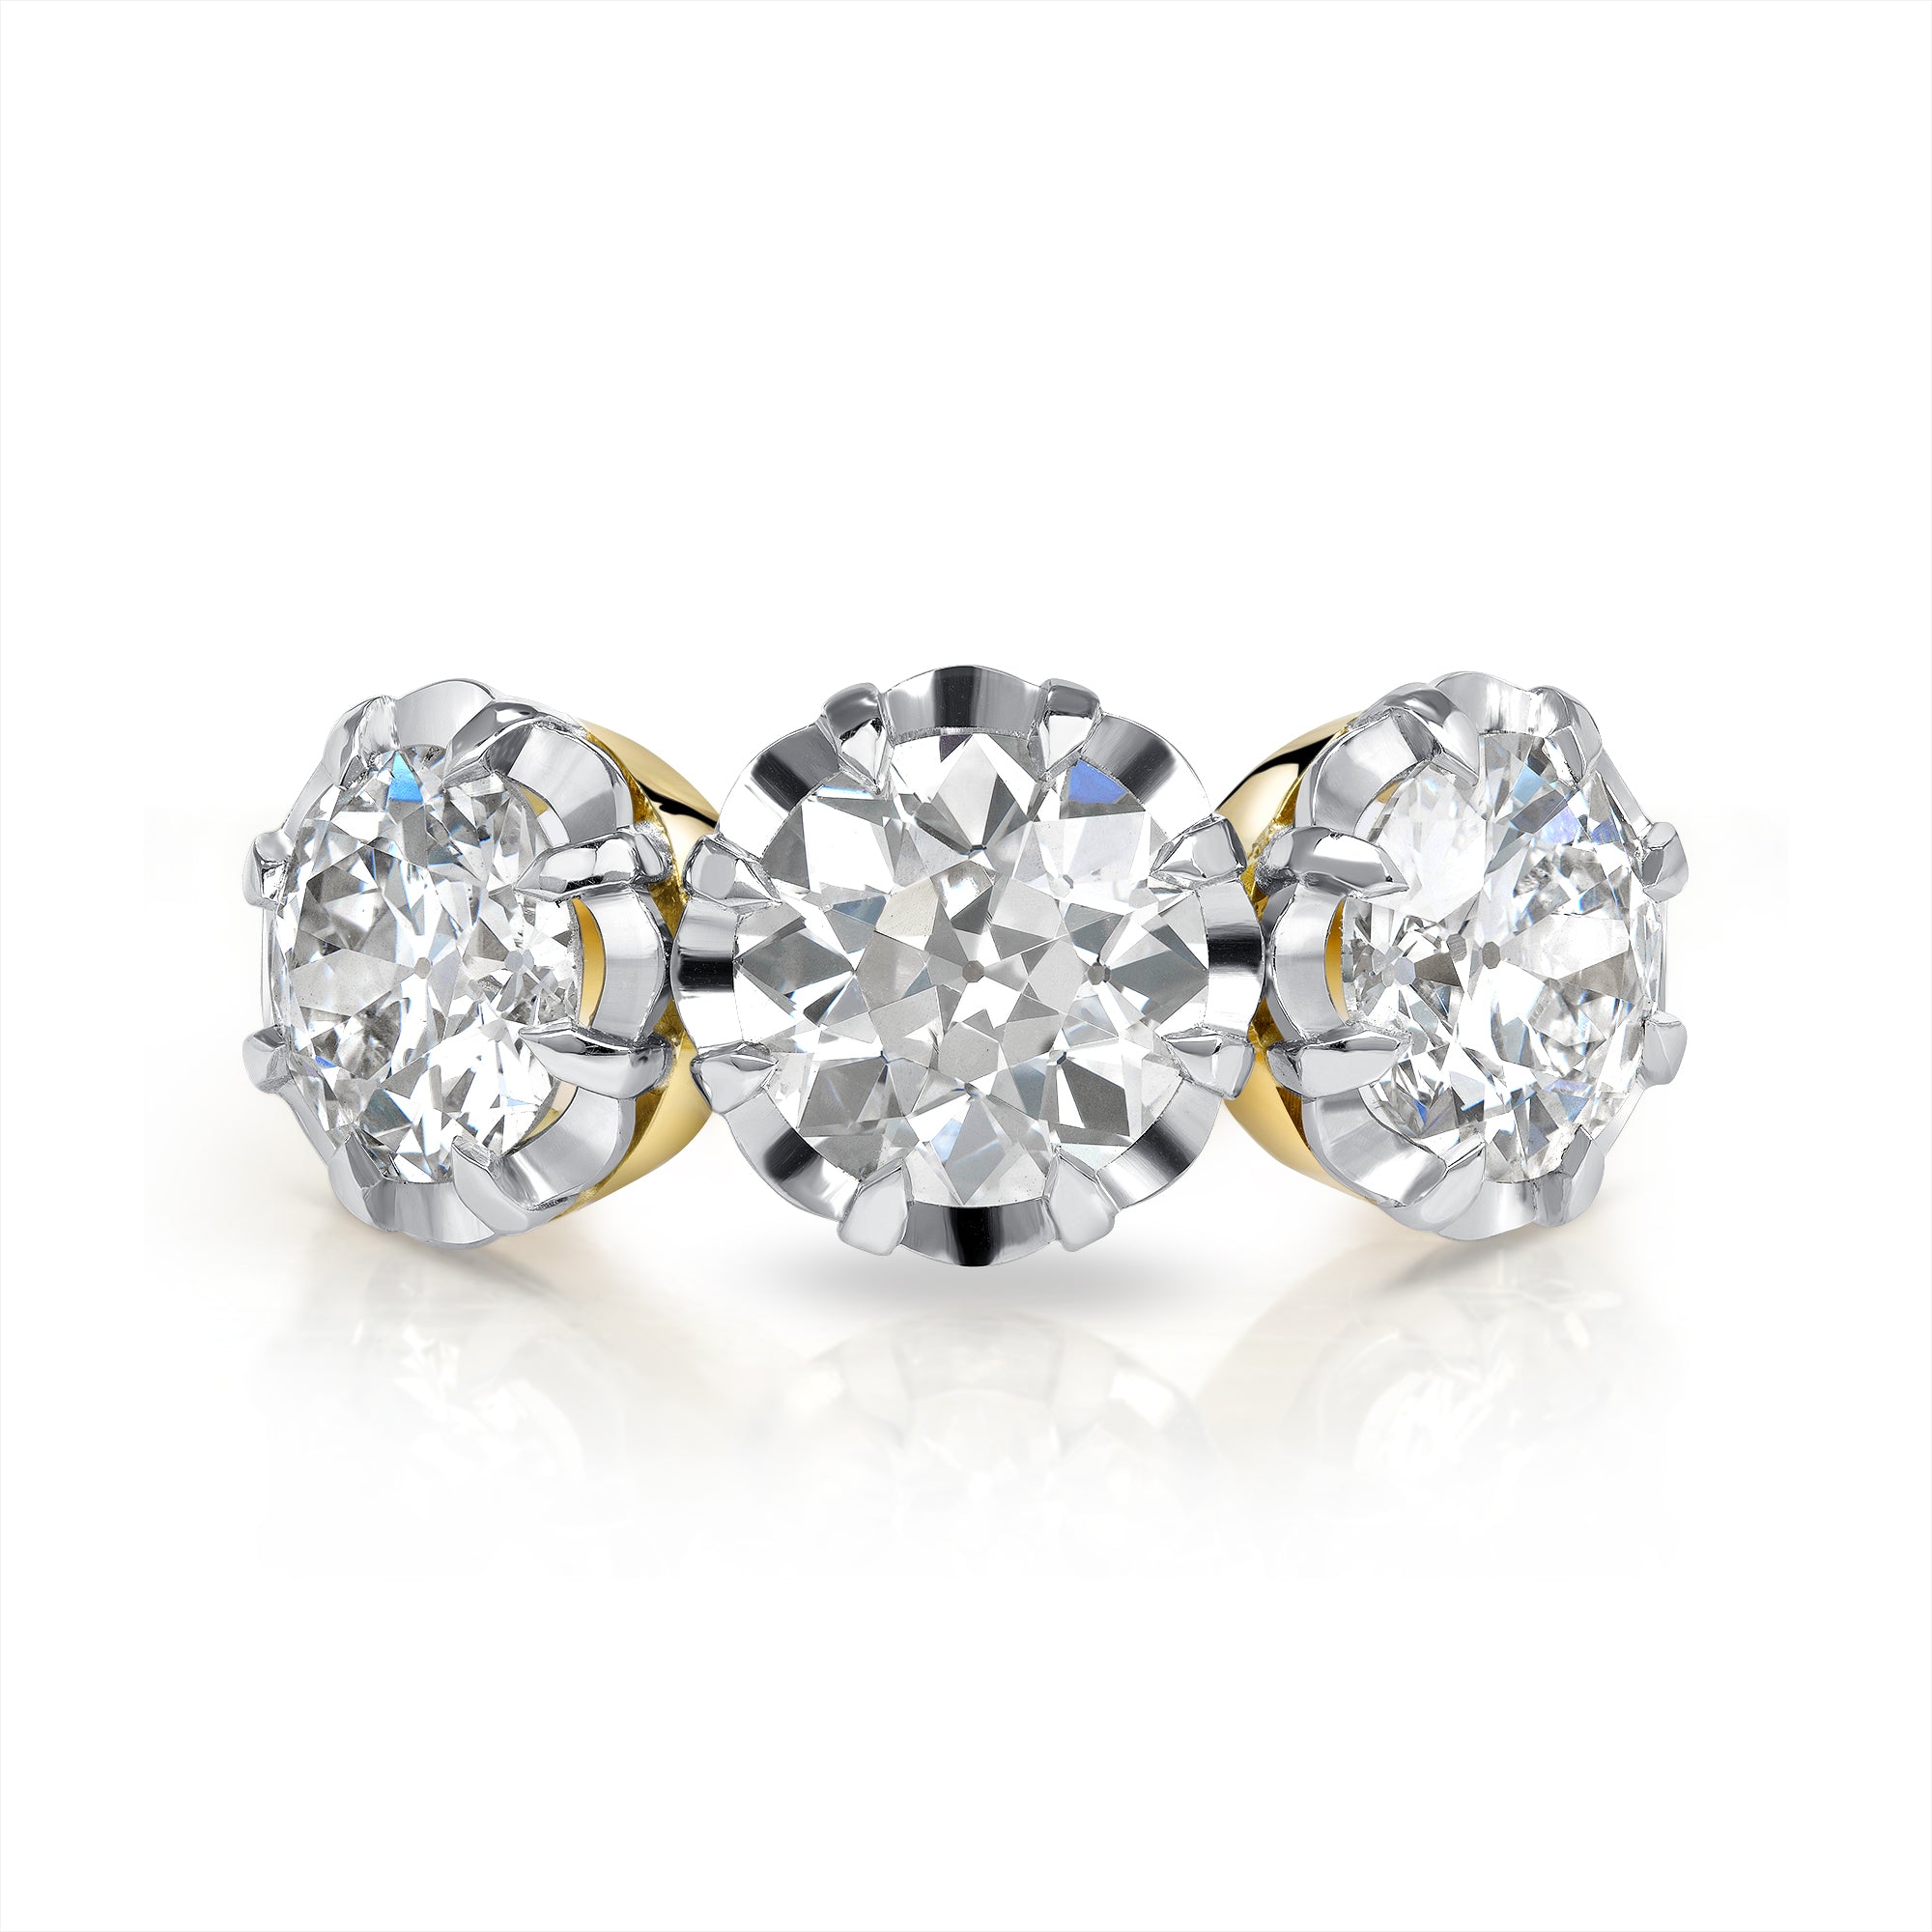 SINGLE STONE THREE STONE JOLENE RING featuring 1.34ct H/SI2 old European cut diamond with 2.05ctw old European cut accent diamonds prong set in a handcrafted 18K yellow gold and platinum mounting.